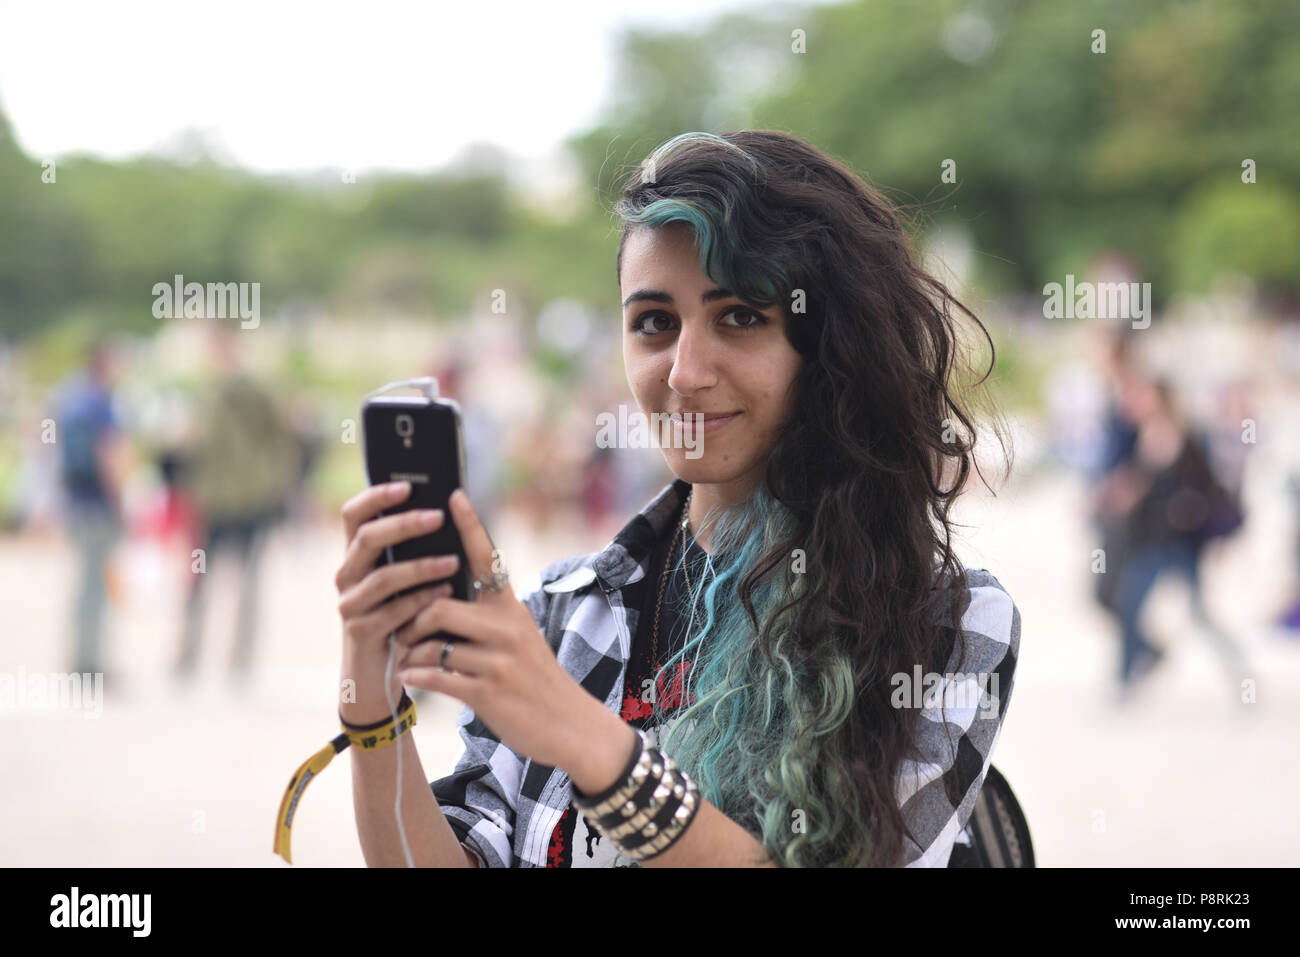 July 14, 2016 - Paris, France: French arts students Calypso, 17 yo, takes part in a mass Pokemon hunt in the Luxembourg Garden in central Paris. Hundreds of players of the new Pokemon Go game showed up to take part in a massive hunt despite the authorities' attempt to cancel the event. Despite playing mostly solo, the Pokemon Go users enjoyed to interact and meet other players. Millions of users have already downloaded the game, which requires users to catch on-screen pokemon characters using their real-world location. Des jeunes participent a une chasse au Pokemons dans le jardin du Luxembour Stock Photo